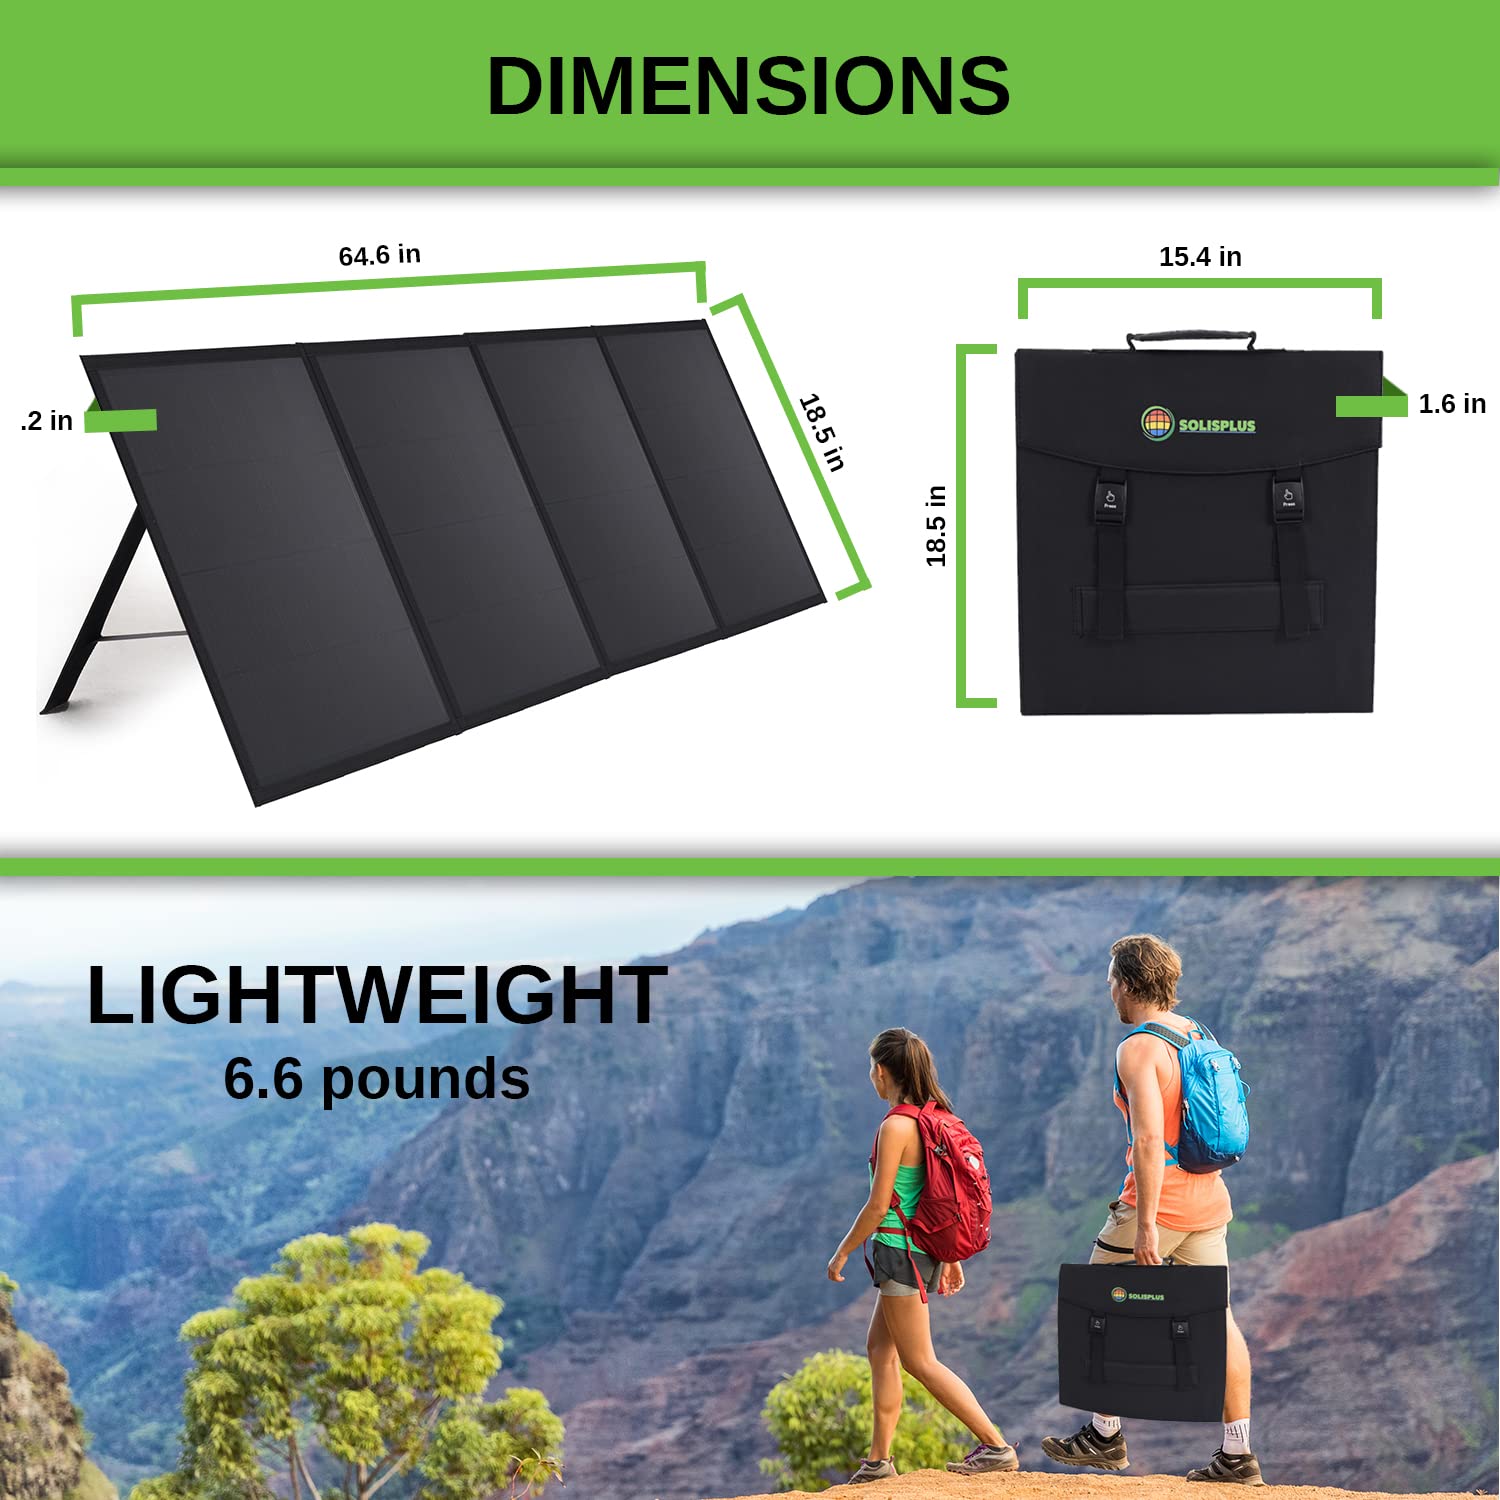 100 Watt Portable Solar Panel for Camping with Power Bank - Foldable ETFE Lightweight Solar Panel with 1 USB QC 3.0 5V/3A , 1 USB 5V/3A, DC5525 plus 10 DC connectors - Includes 10000mAh Power Bank  - Like New